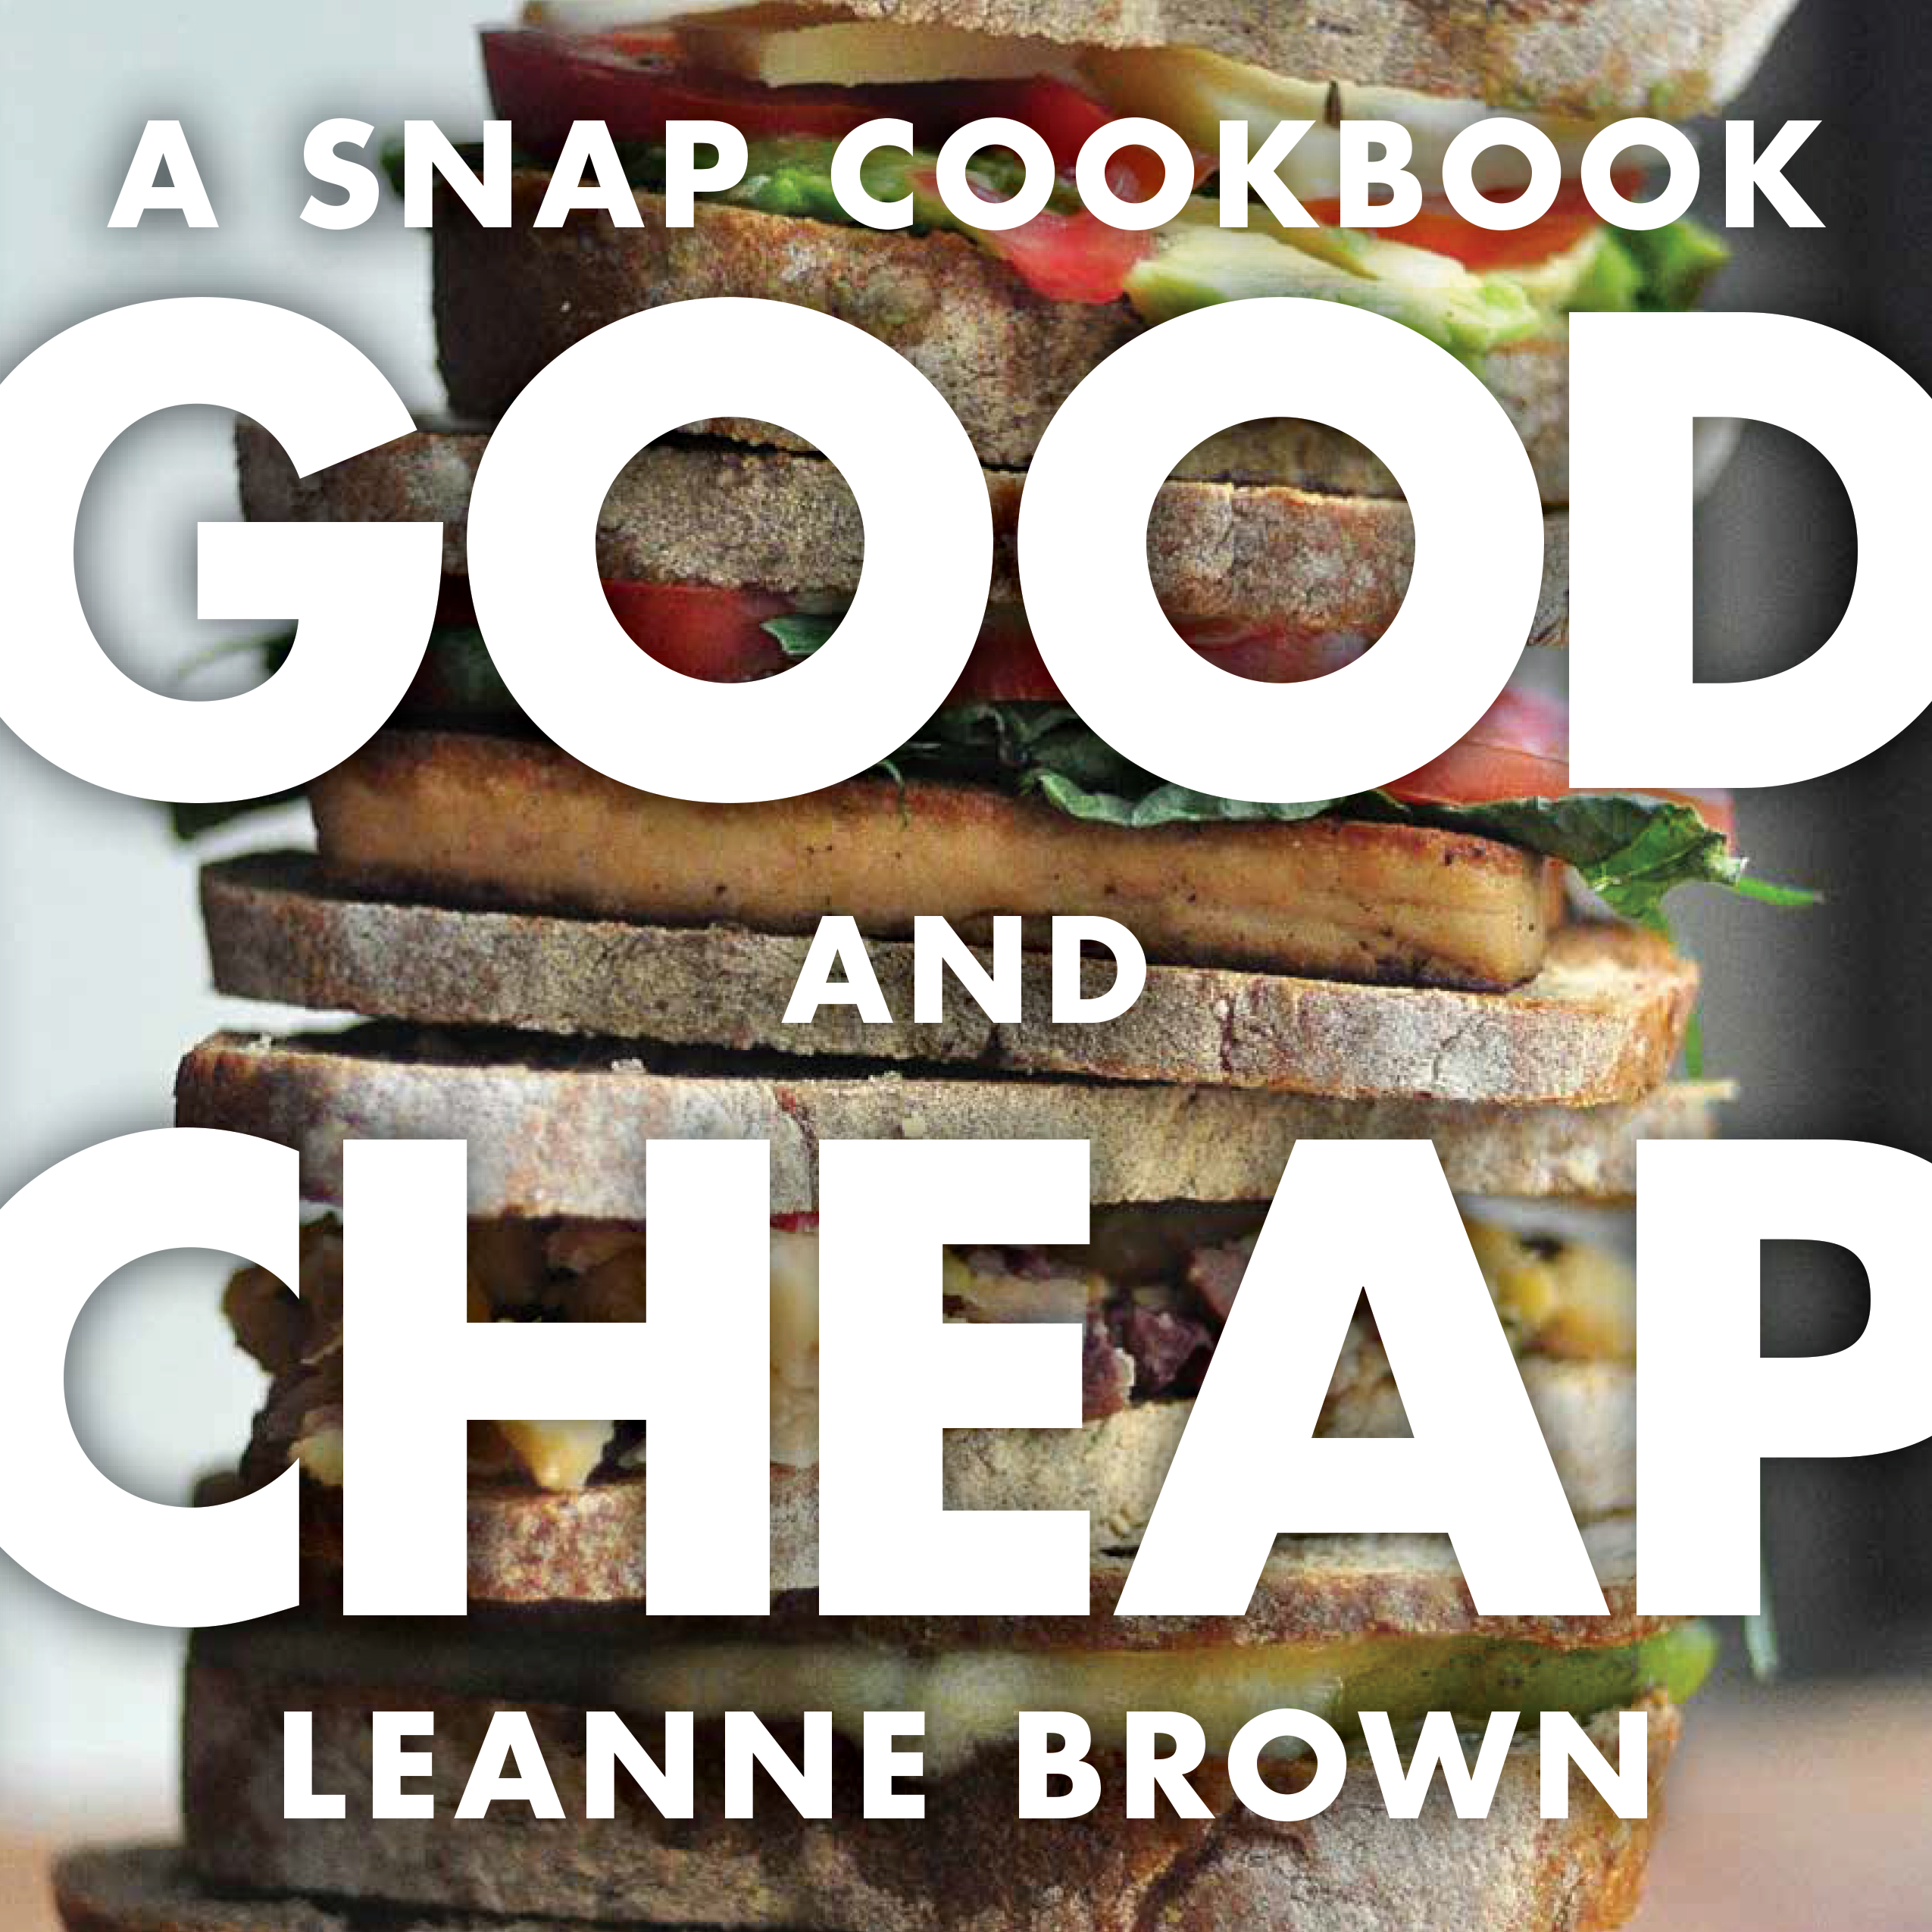 Good and cheap cookbook by Leanne Brown